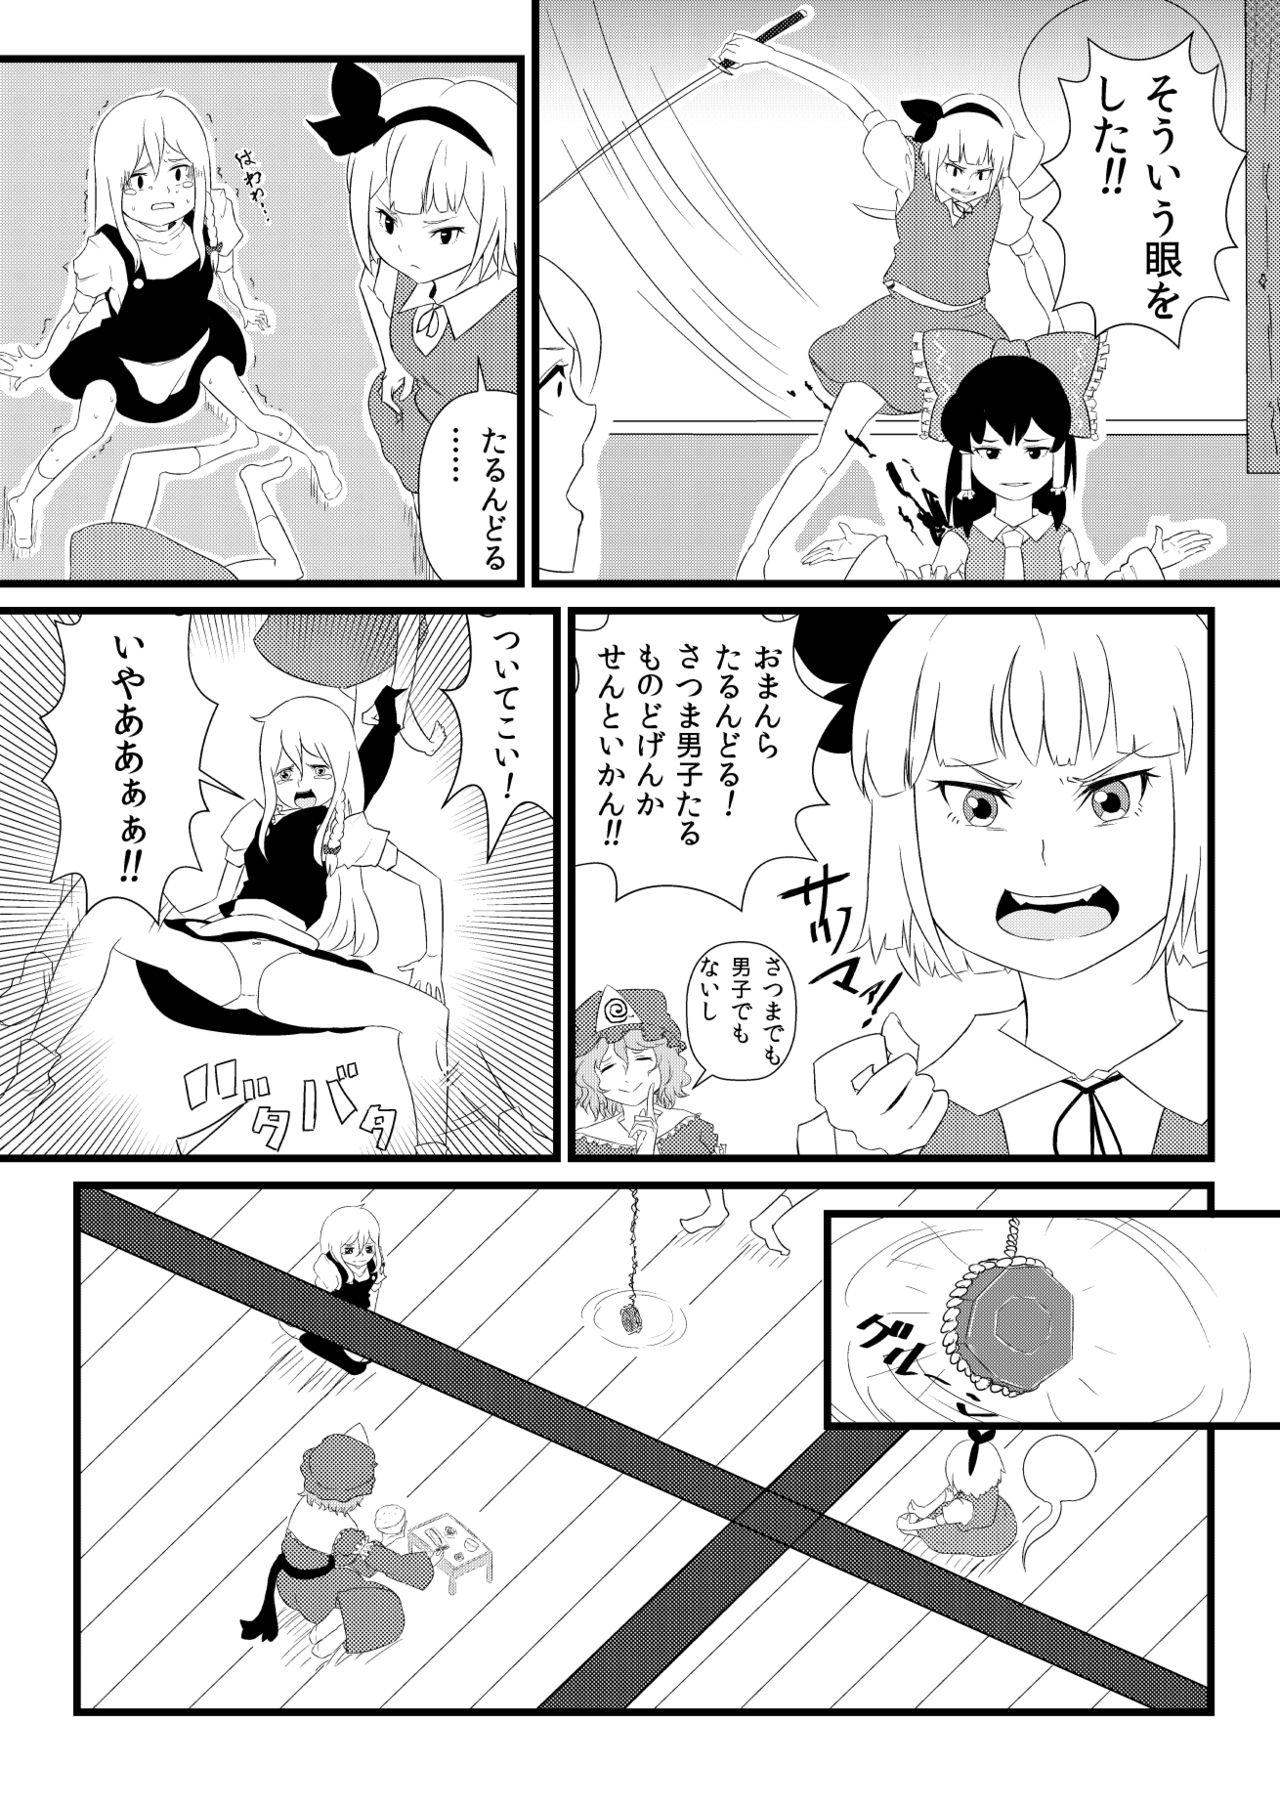 Boobs 東方板としあき合同誌5 - Touhou project Home - Page 3